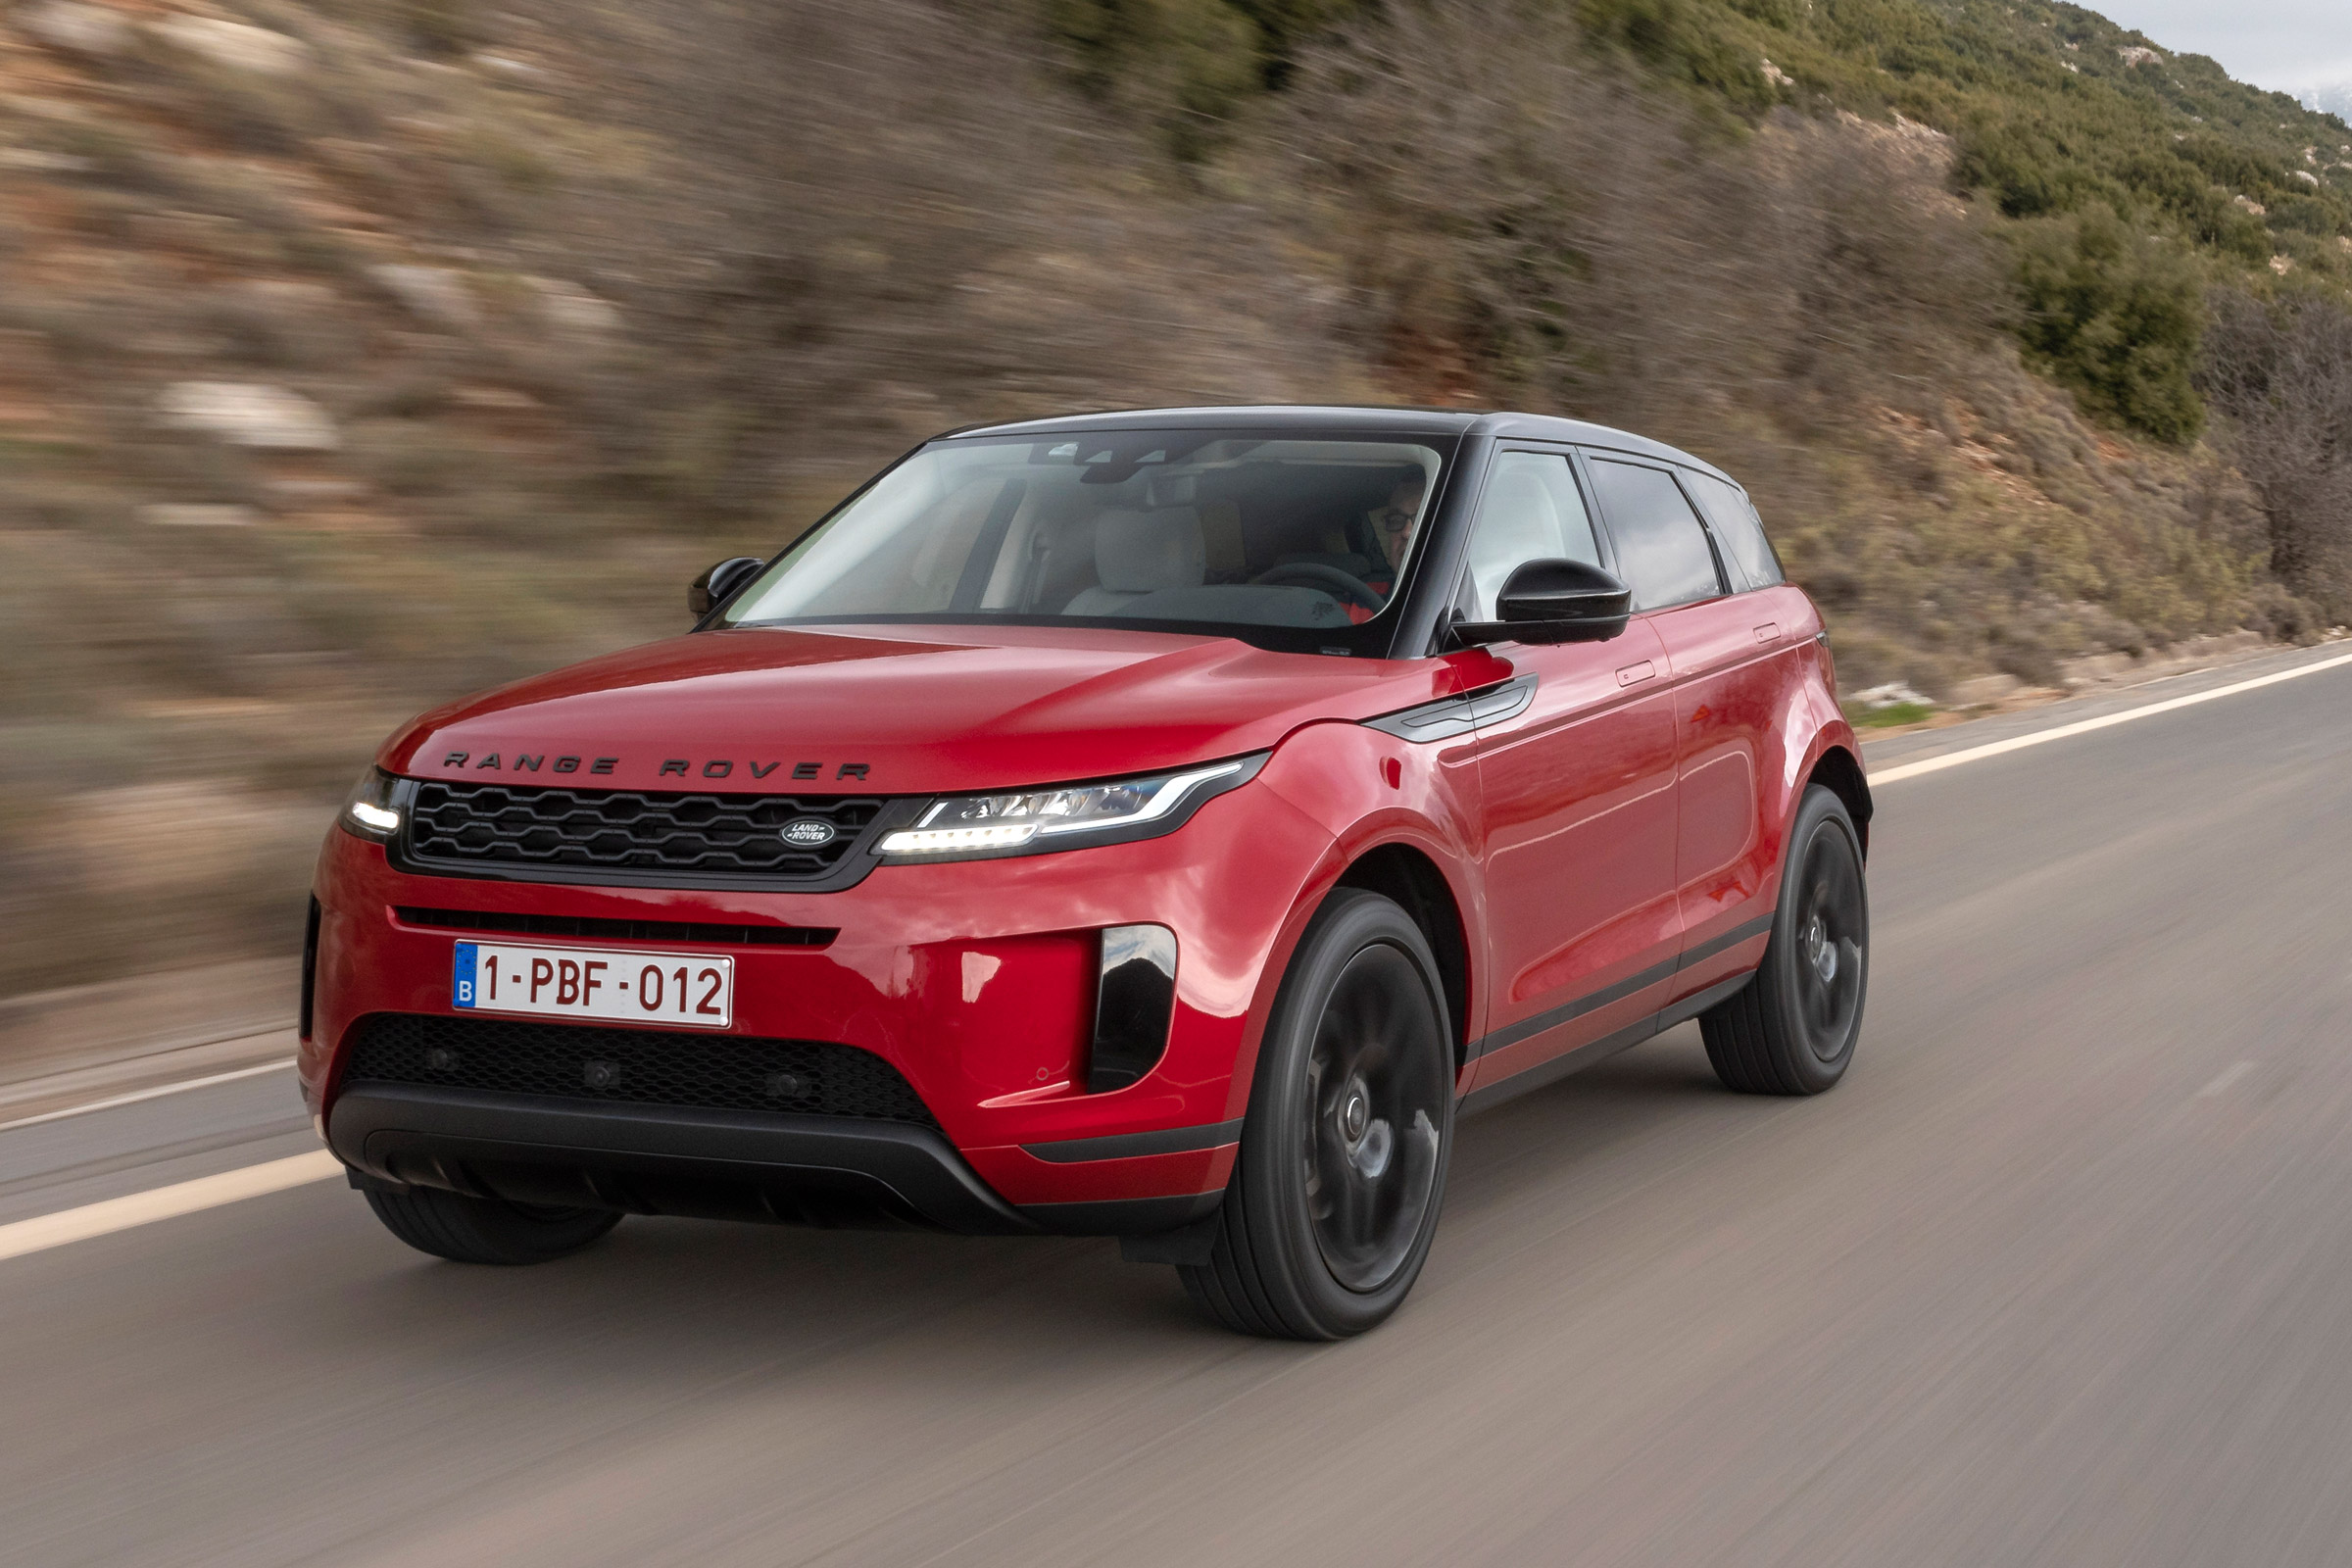 Range Rover Evoque 2019 Hp  . Range Rover Evoque 2019 Has Been Revealed In The Uk Along With Its Full Price, Specs And Release Date.